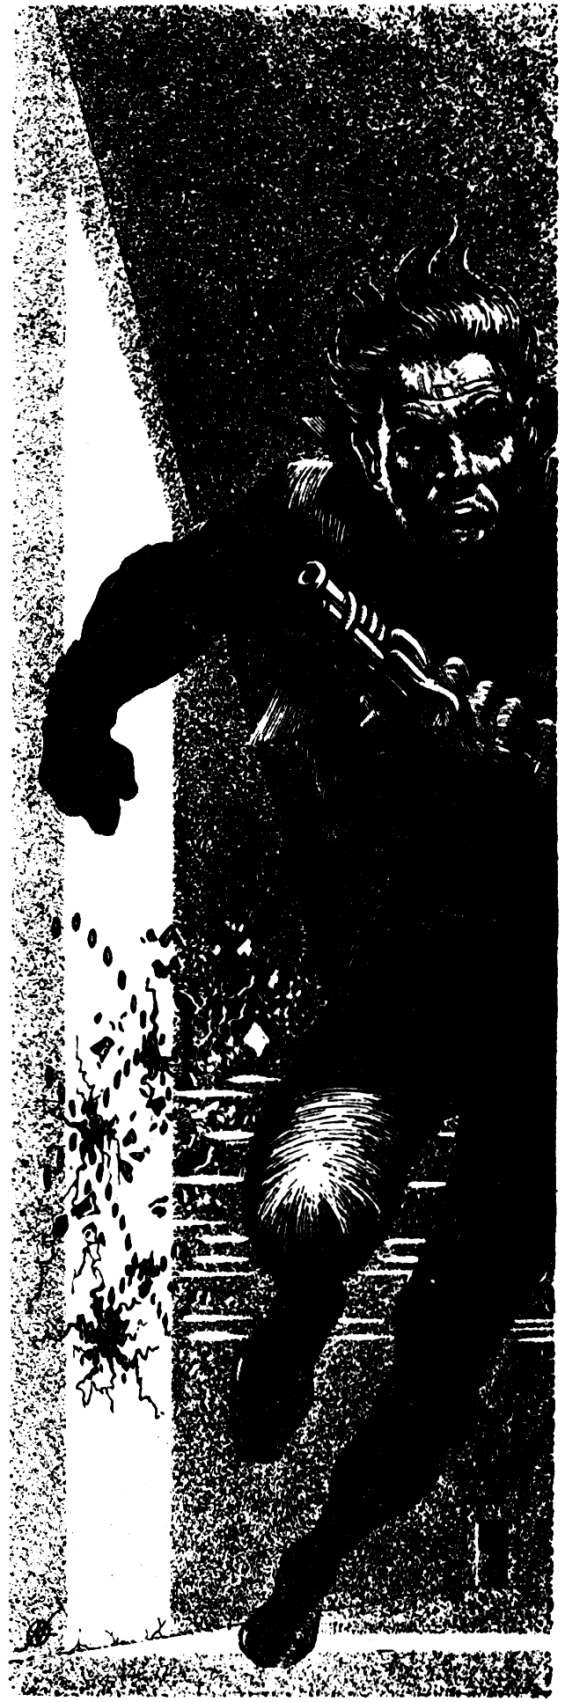 The Stainless Steel Rat - Illustrated by Frank Kelly Freas - from Astounding Science Fiction, August 1957